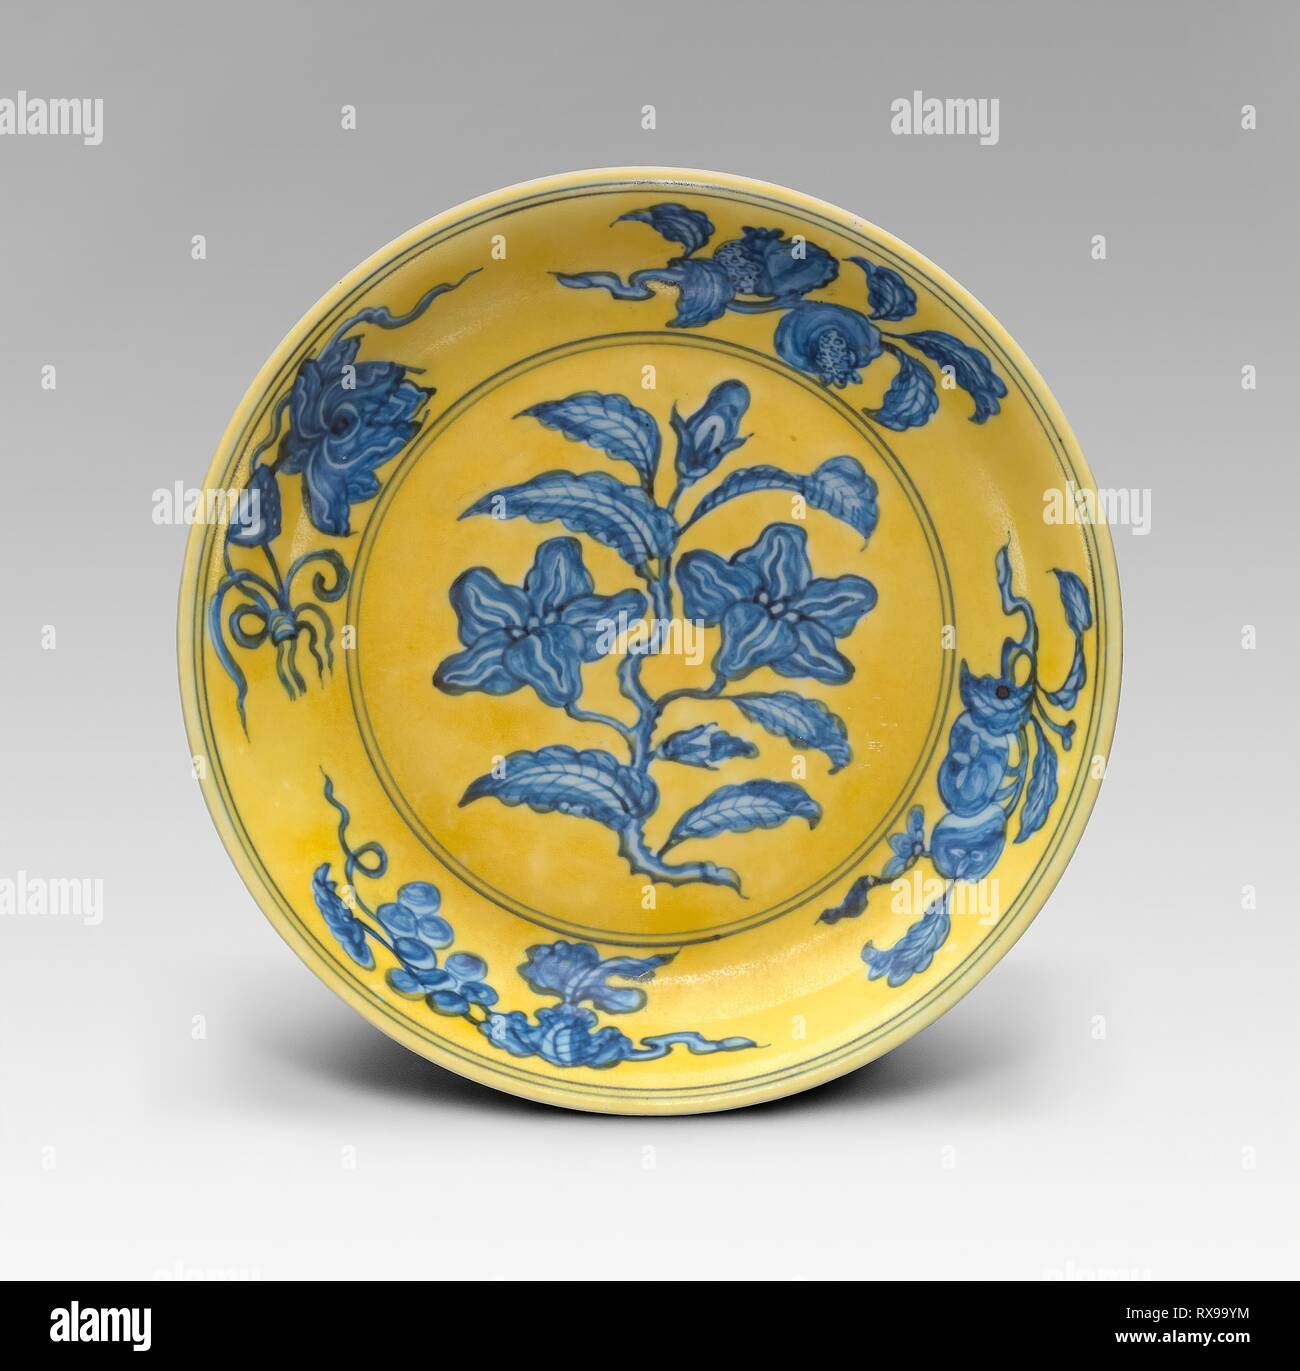 Dish with Floral and Fruit Sprays ('Gardenia Dish'). China. Date: 1488-1505. Dimensions: Diam: 25.6 cm (10 1/8 in.). Porcelain painted in underglaze blue and overglaze yellow enamel. Origin: . Museum: The Chicago Art Institute. Stock Photo